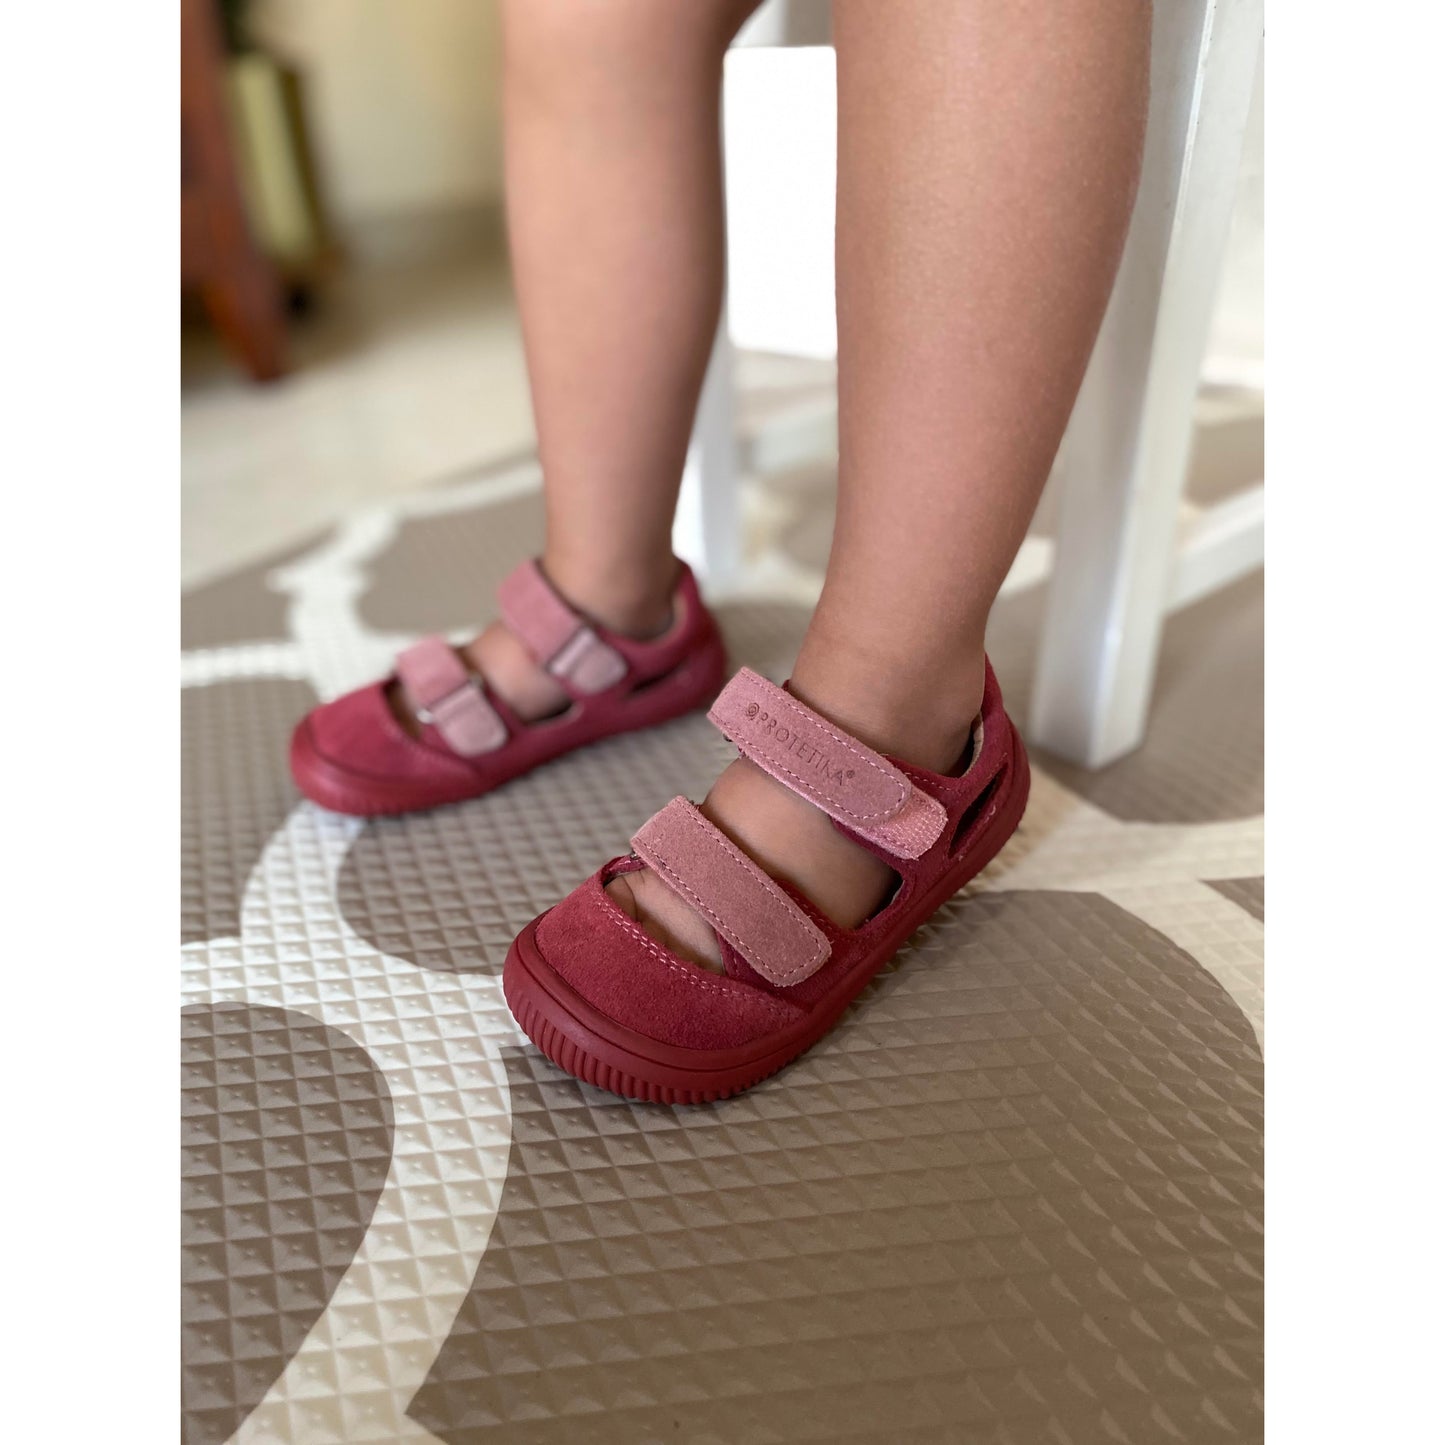 Barefoot sneakers BERG coral from Protetika are a perfect match for any of our girls outfits.